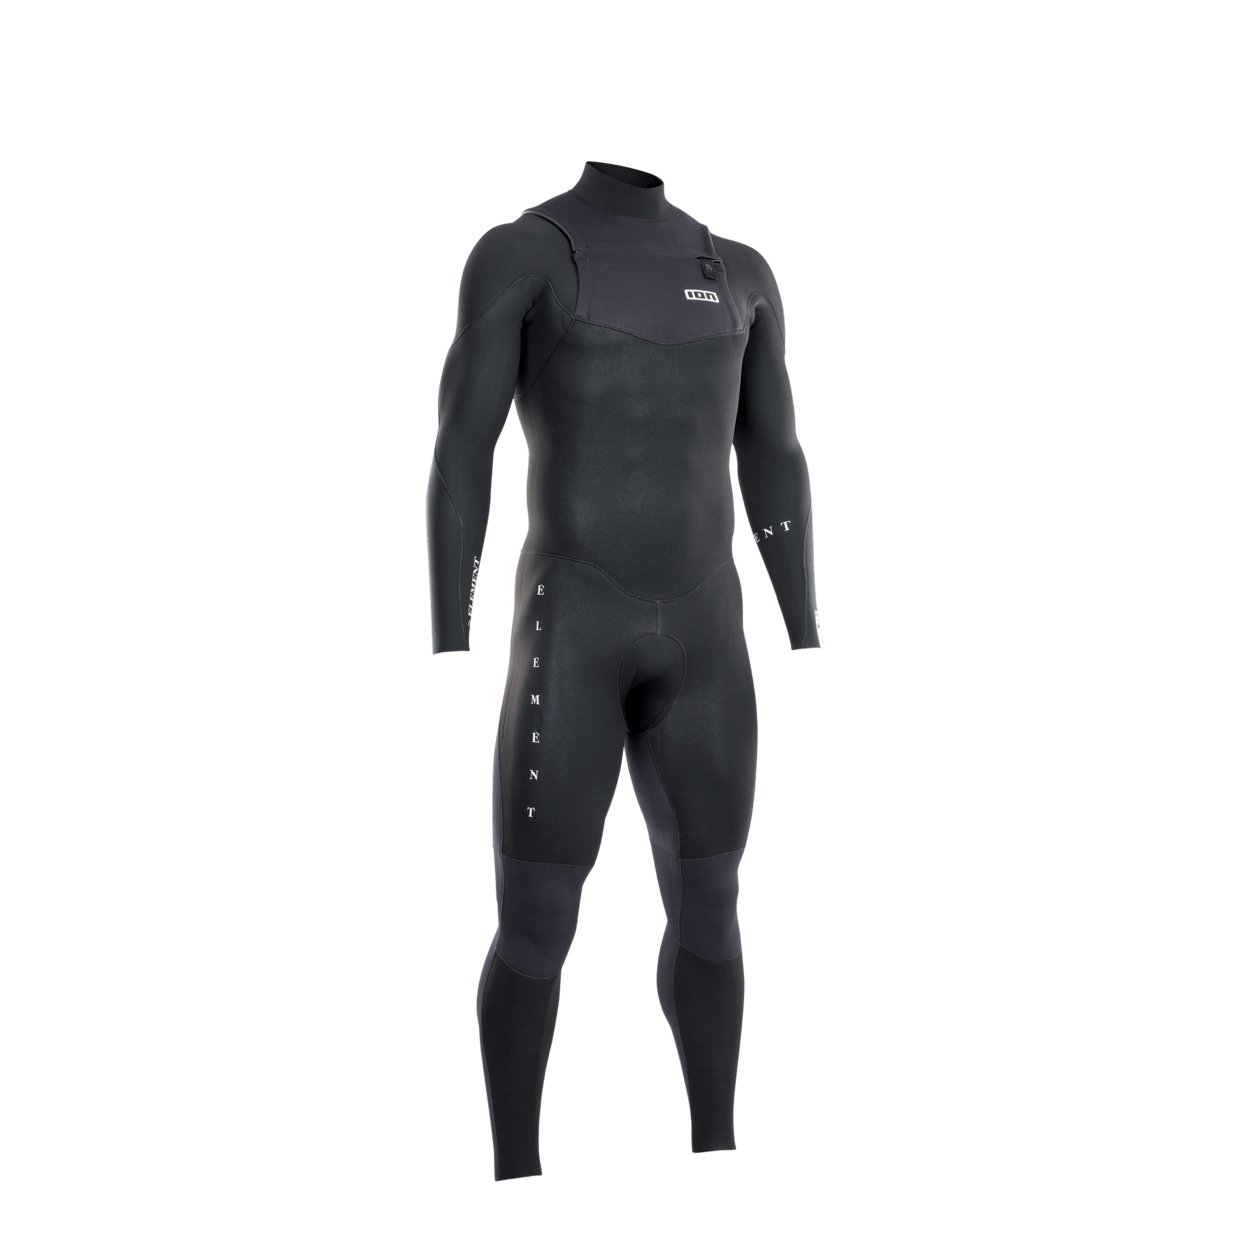 ION Men Wetsuit Element 4/3 Front Zip 2022 - Worthing Watersports - 9008415950249 - Wetsuits - ION Water